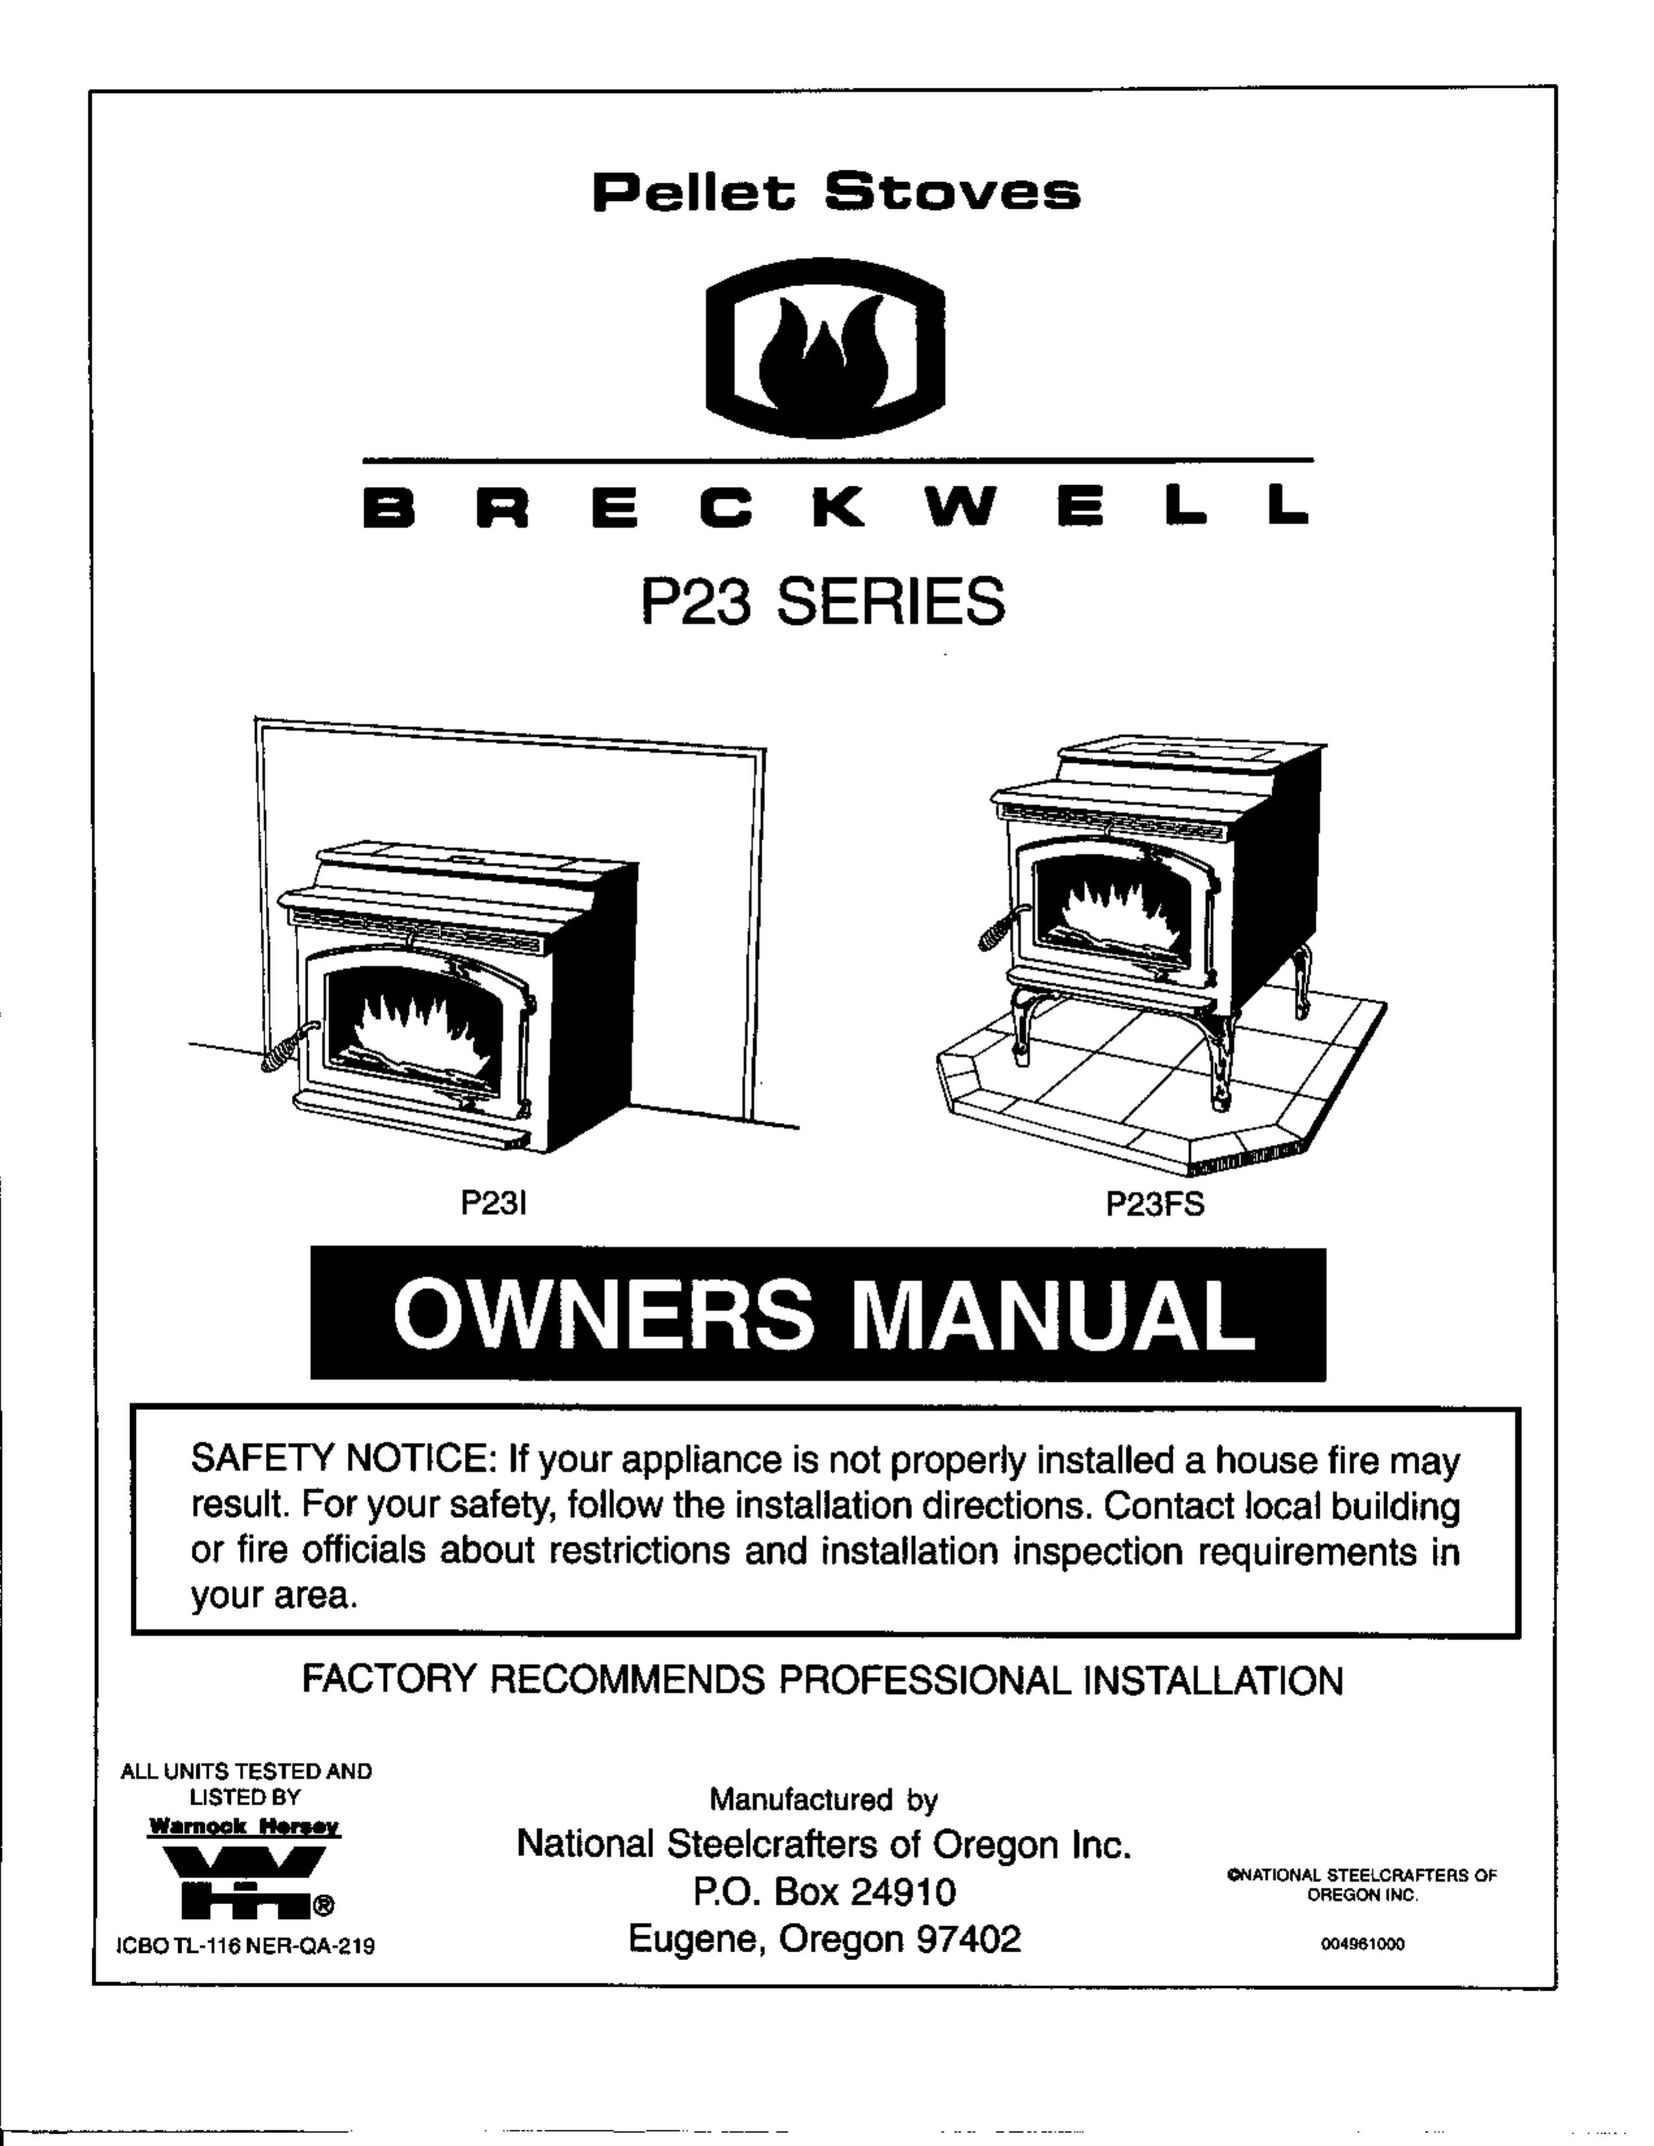 Breckwell P23FS Stove User Manual